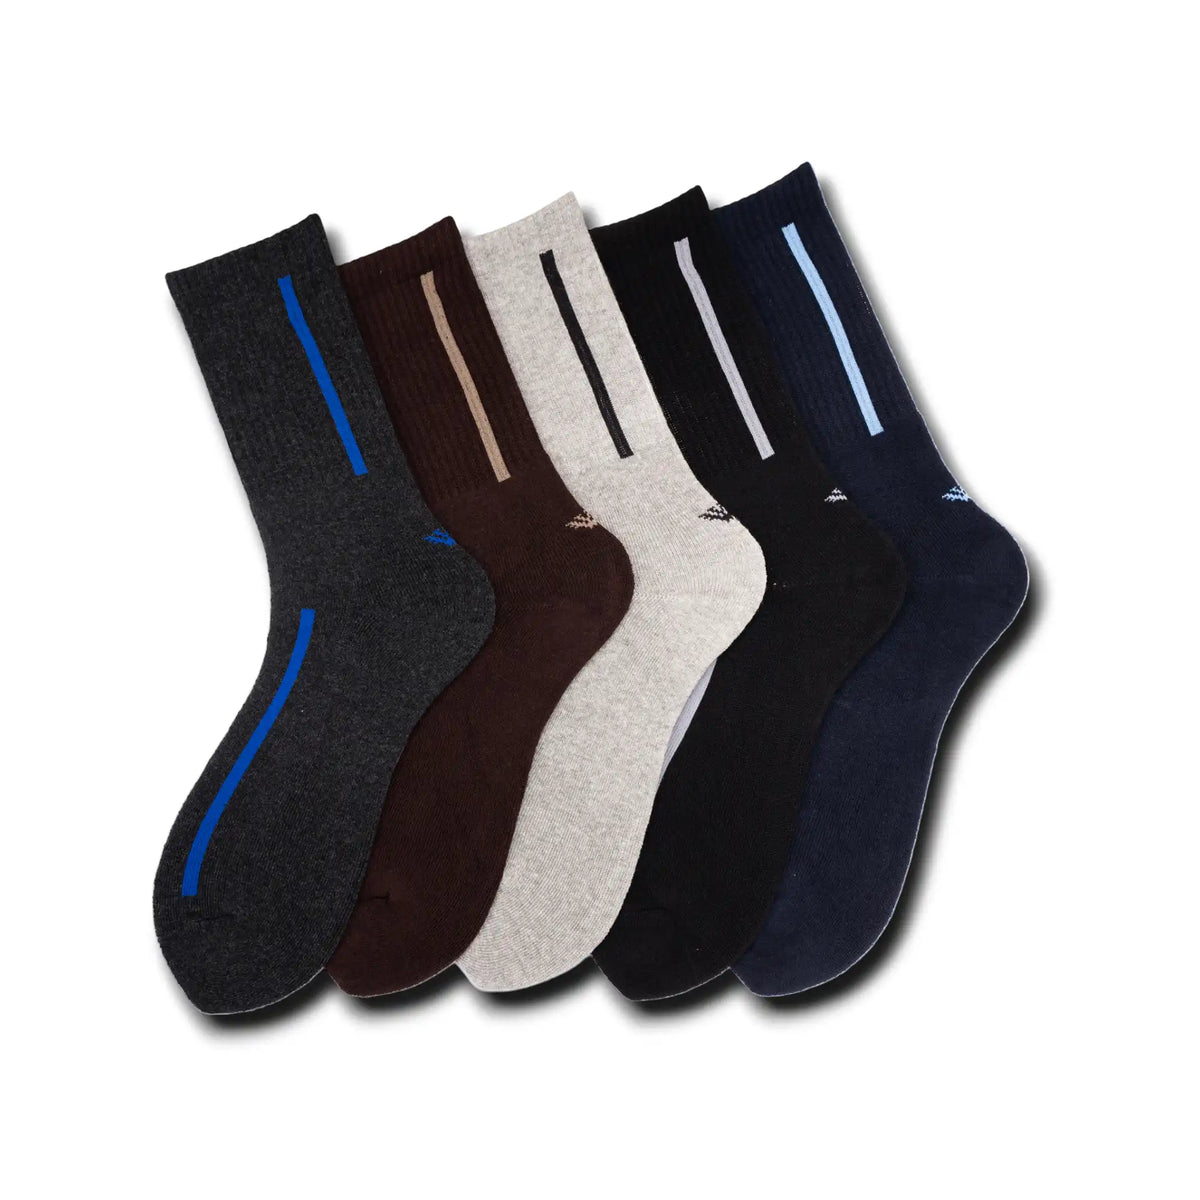 Young Wings Men's Multi Colour Cotton Fabric Design Full Length Socks - Pack of 3, Style no. M1-369